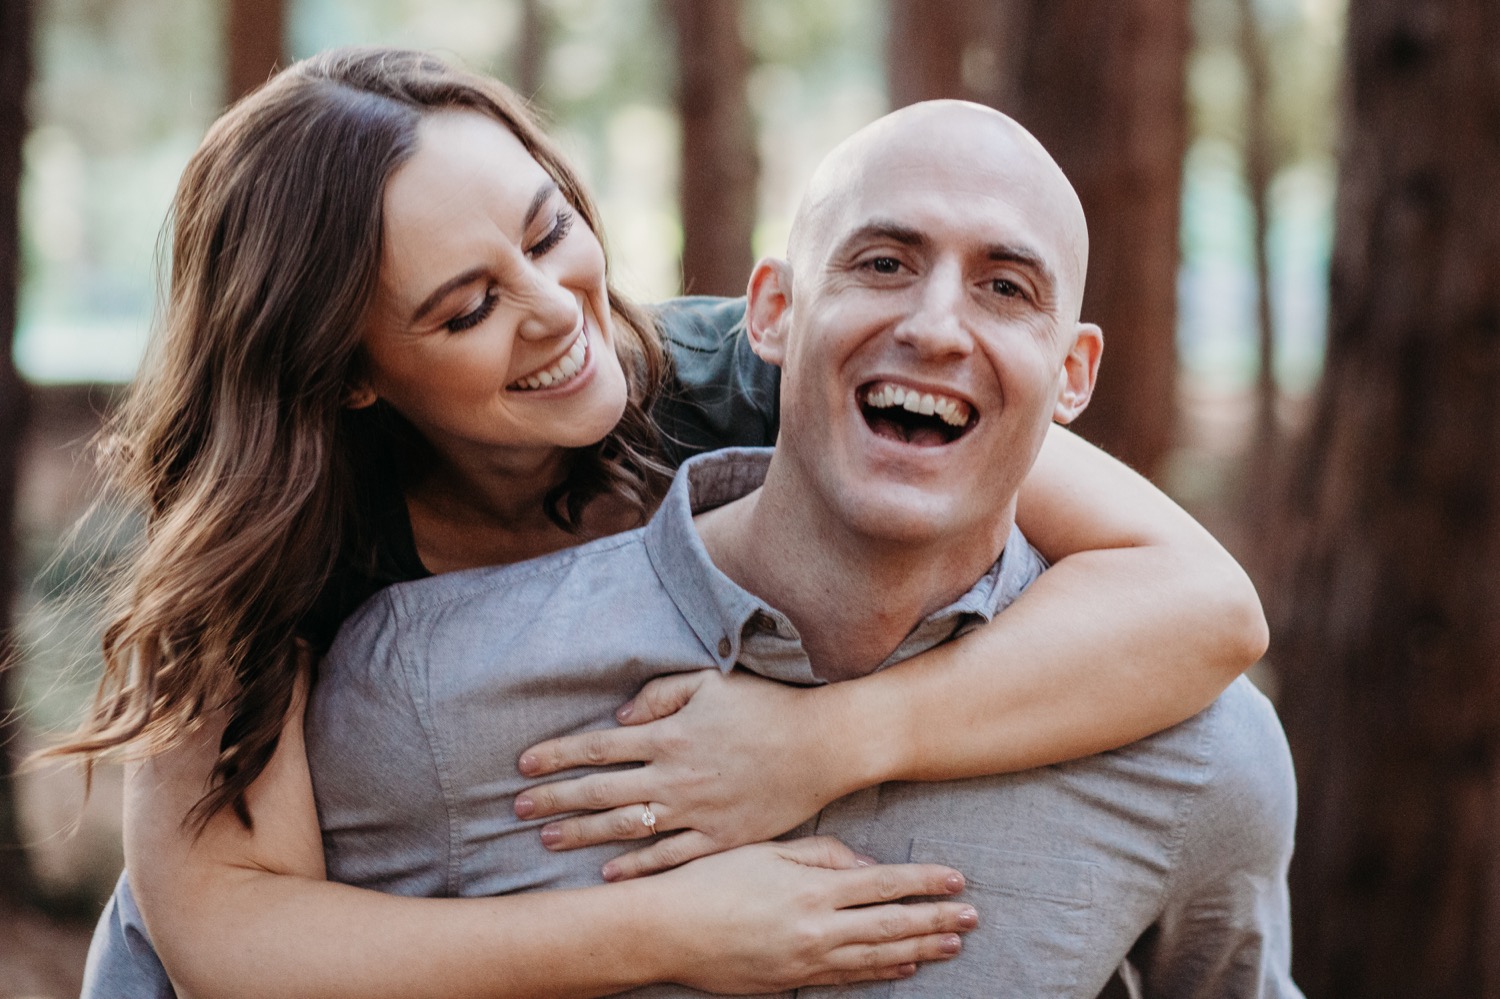 Woman goes on piggyback ride while smiling at her smiling fiance on their Golden Gate Park engagement photoshoot.